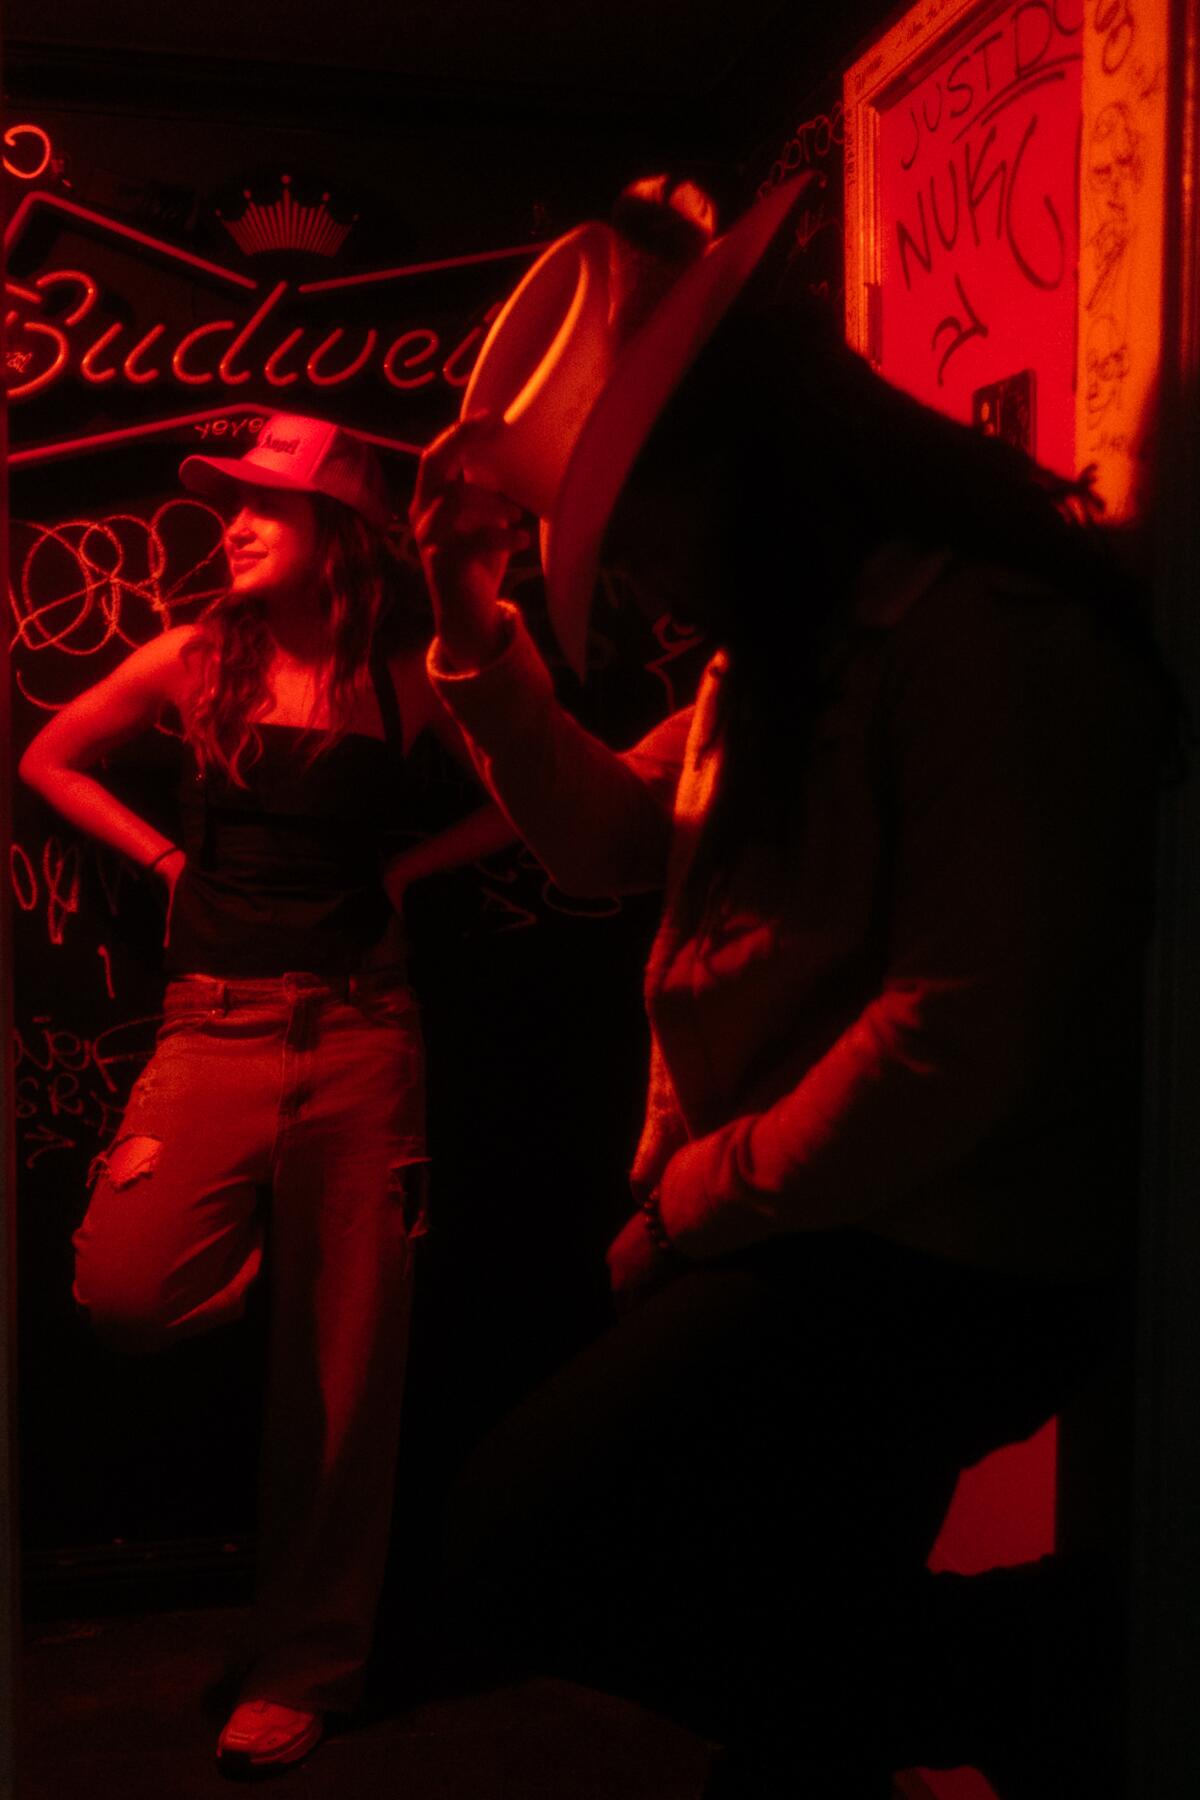 A man and a woman in cowboy hats stand under dramatic red lighting